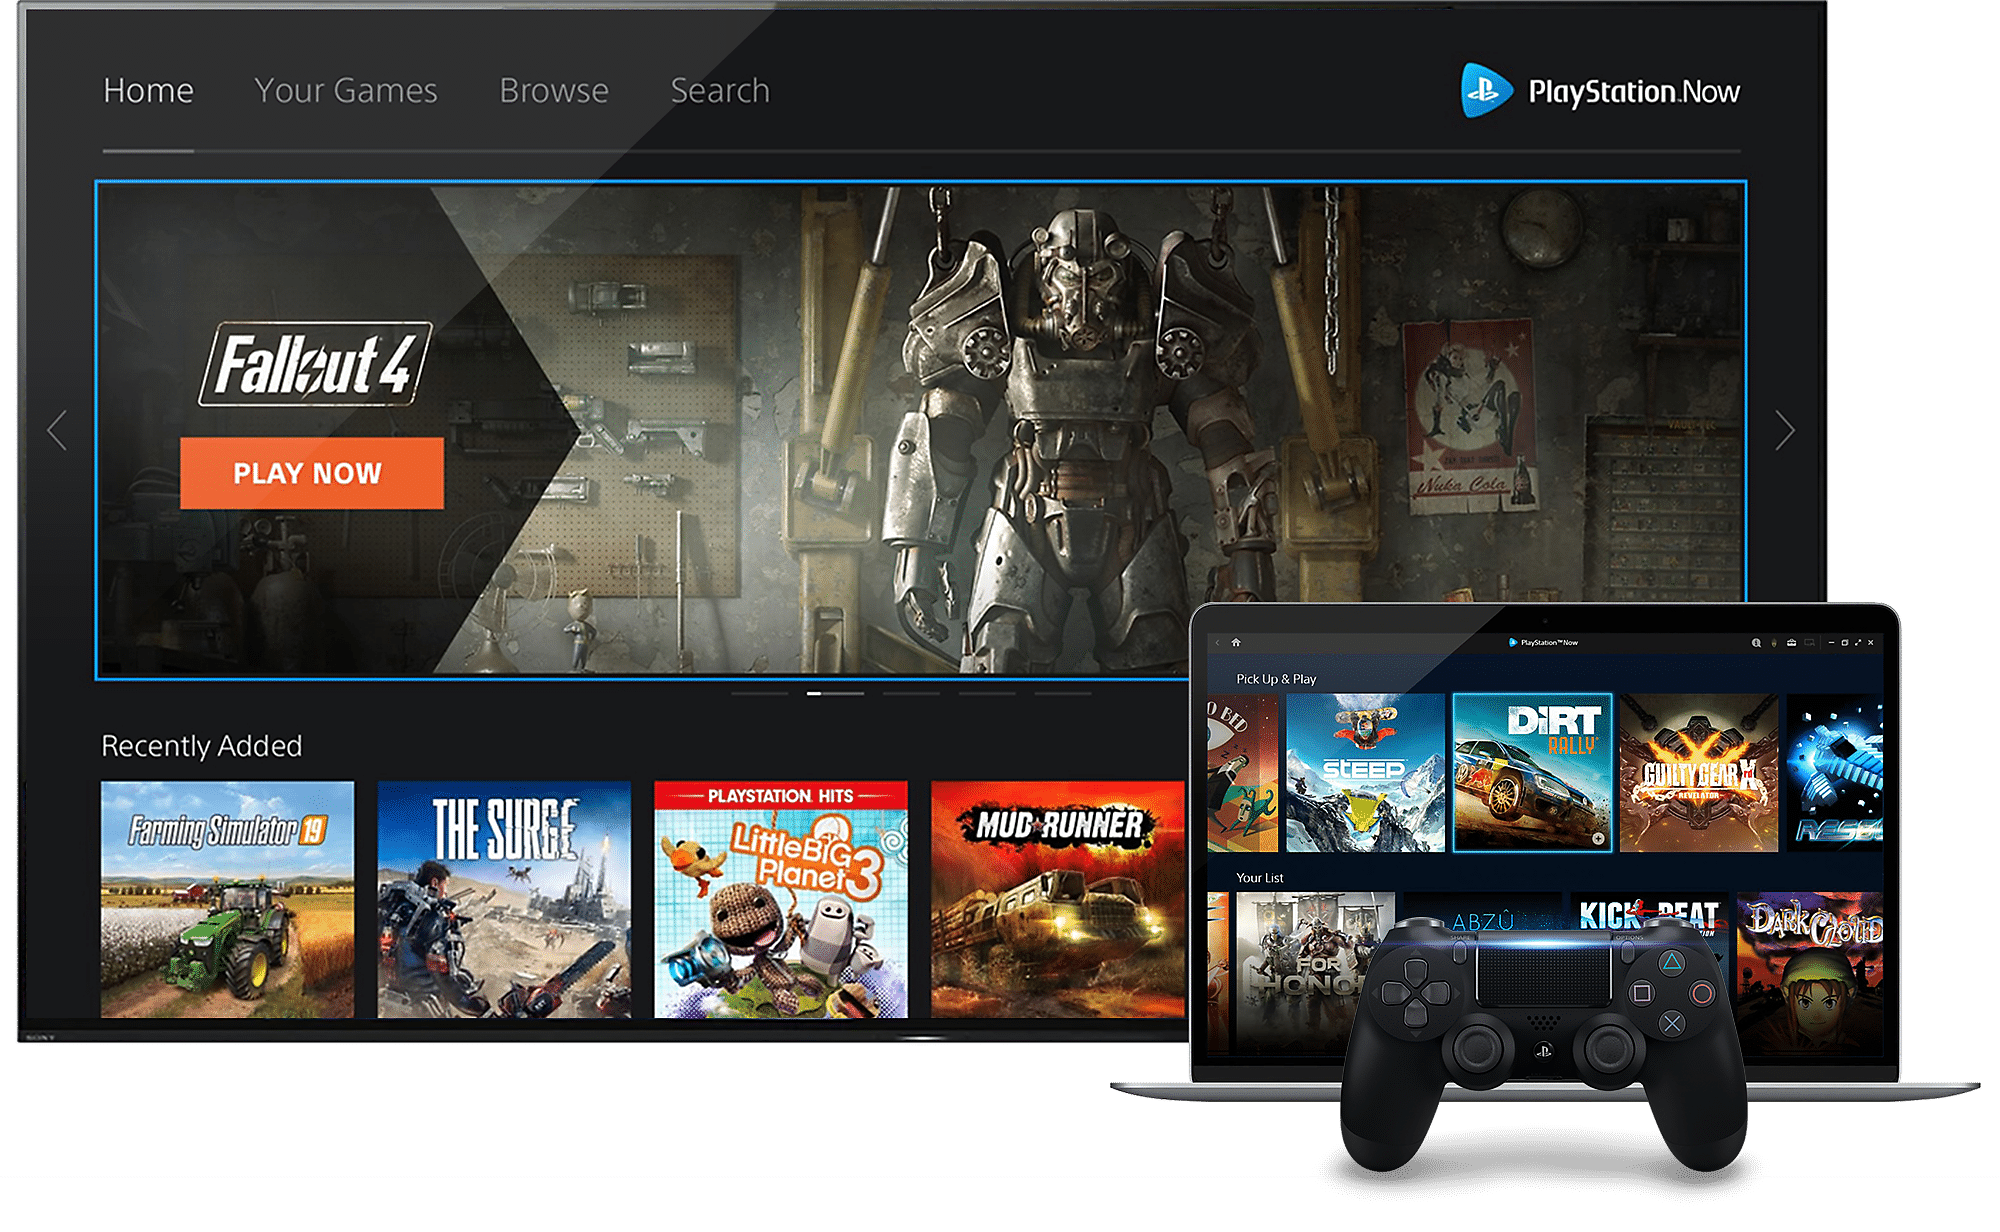 11 Best Cloud Gaming Services in 2023 ( Start for Free )